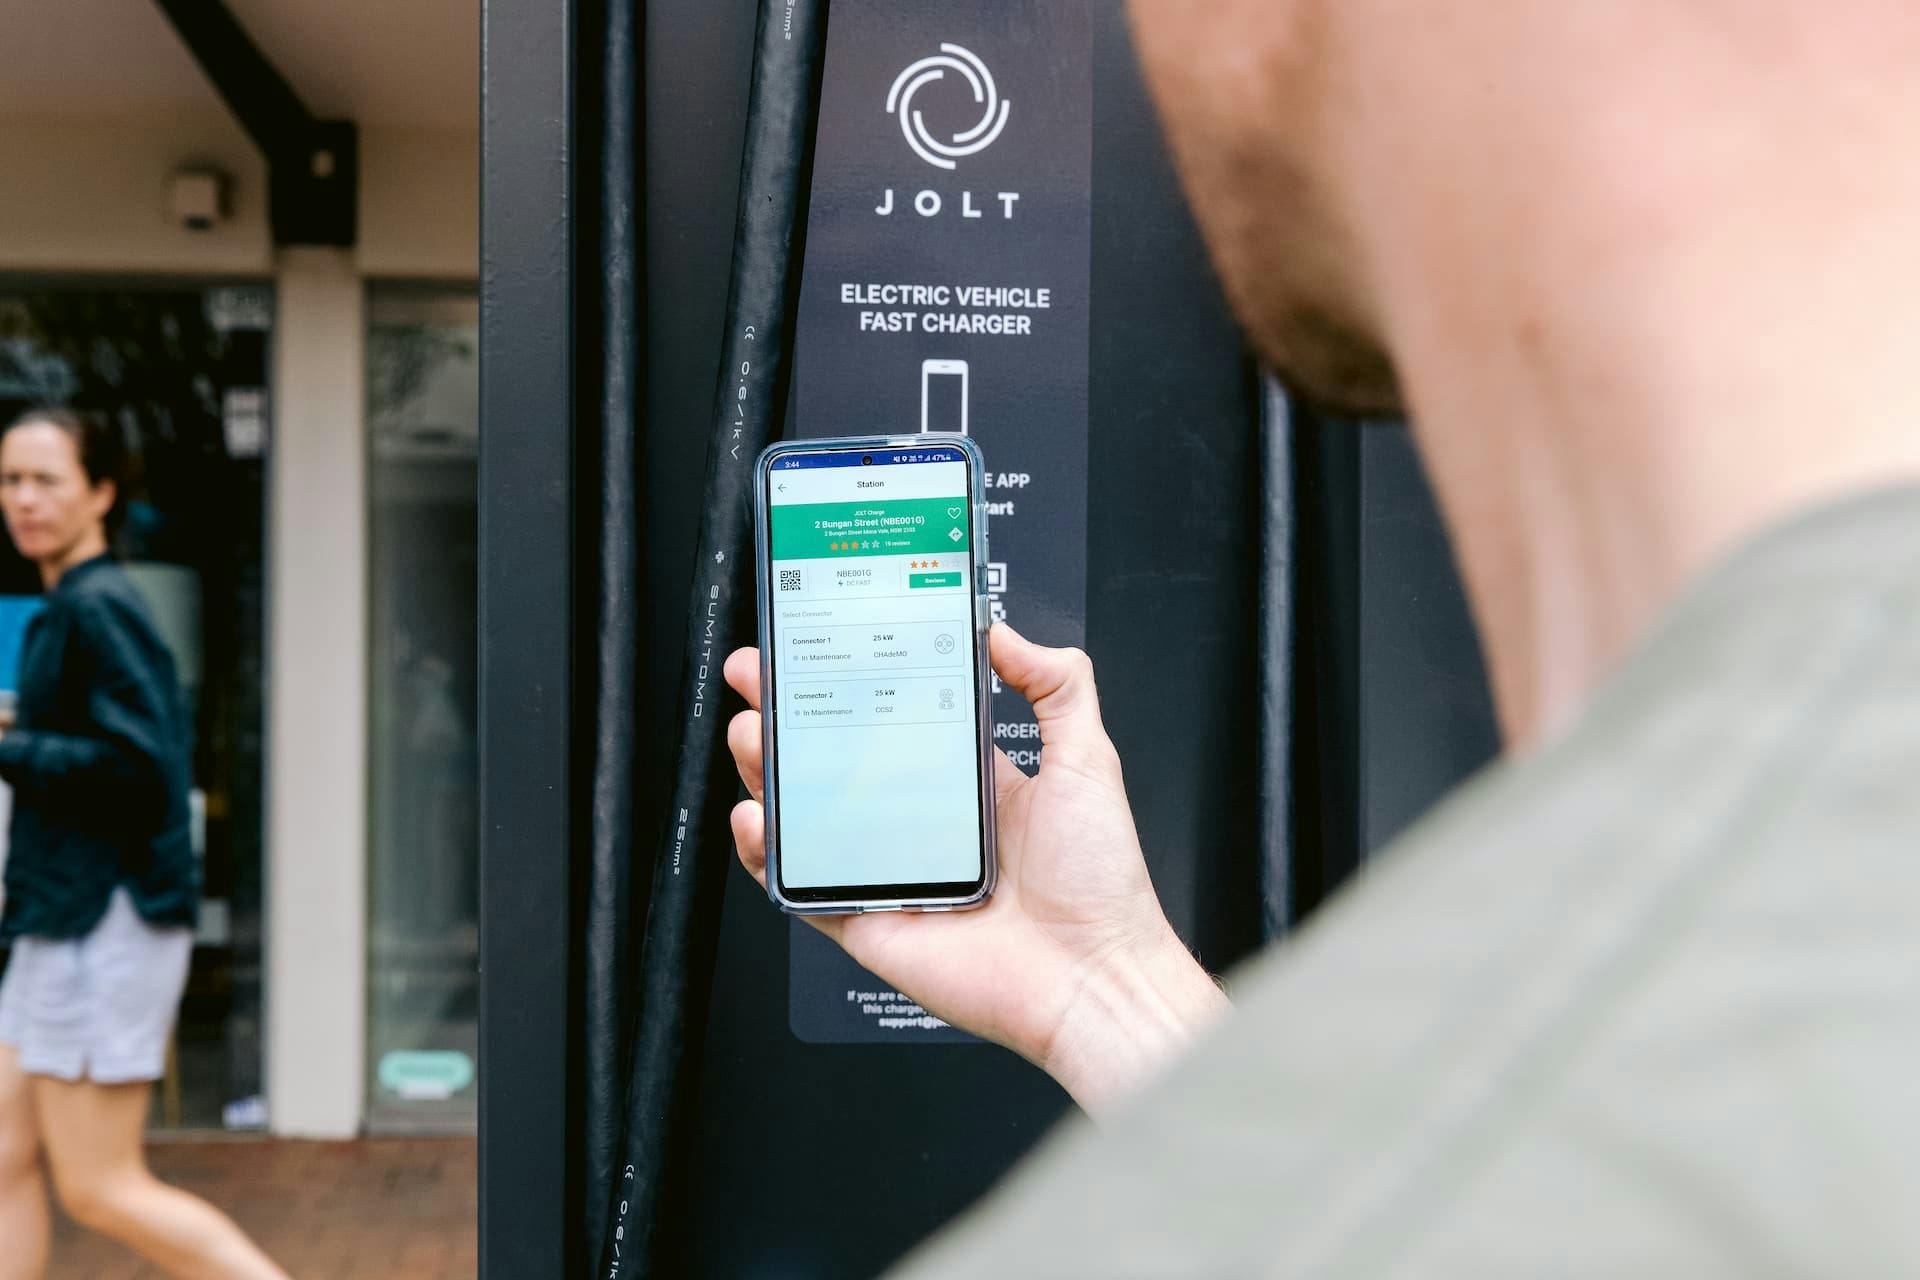 Person holding Samsung phone with Jolt charging provider app open